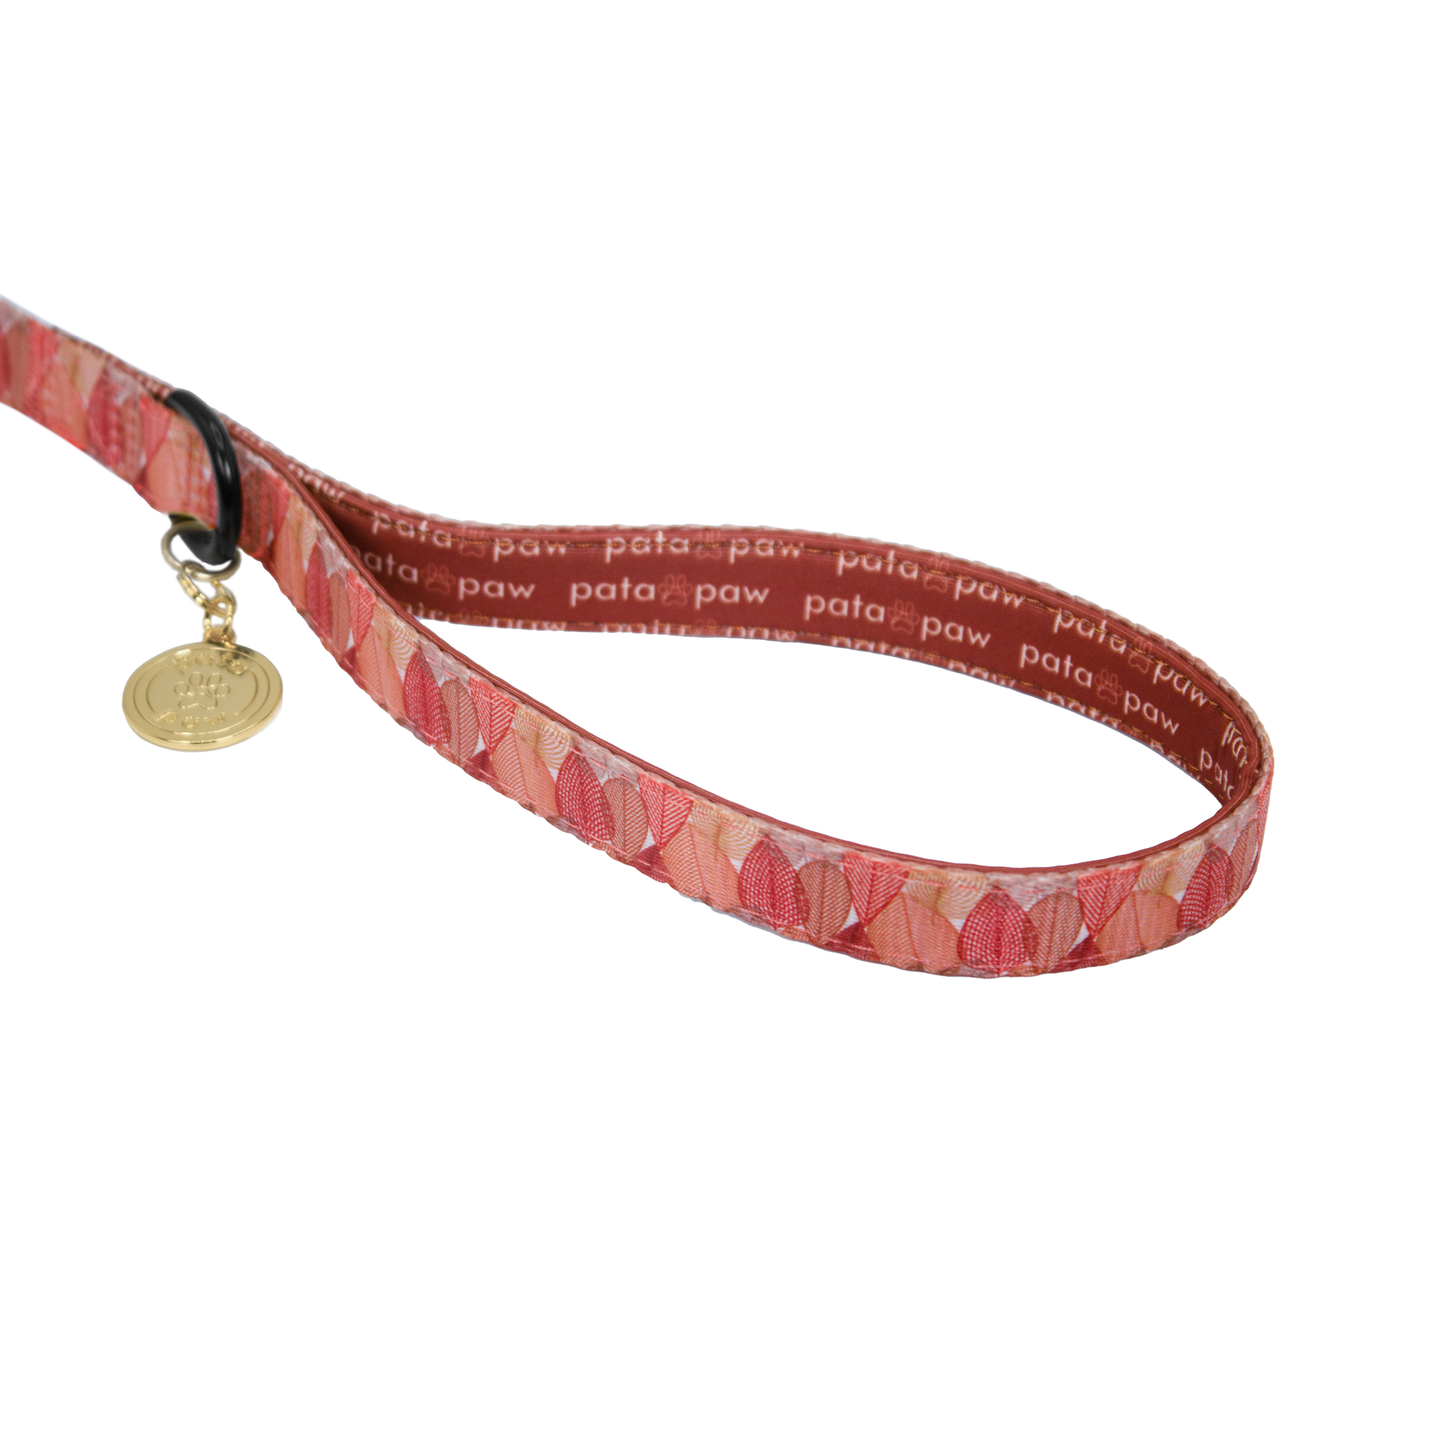 pata paw autumn crunch leash showing signature handle, metallic ring to attach a poop bag holder and golden paw medal